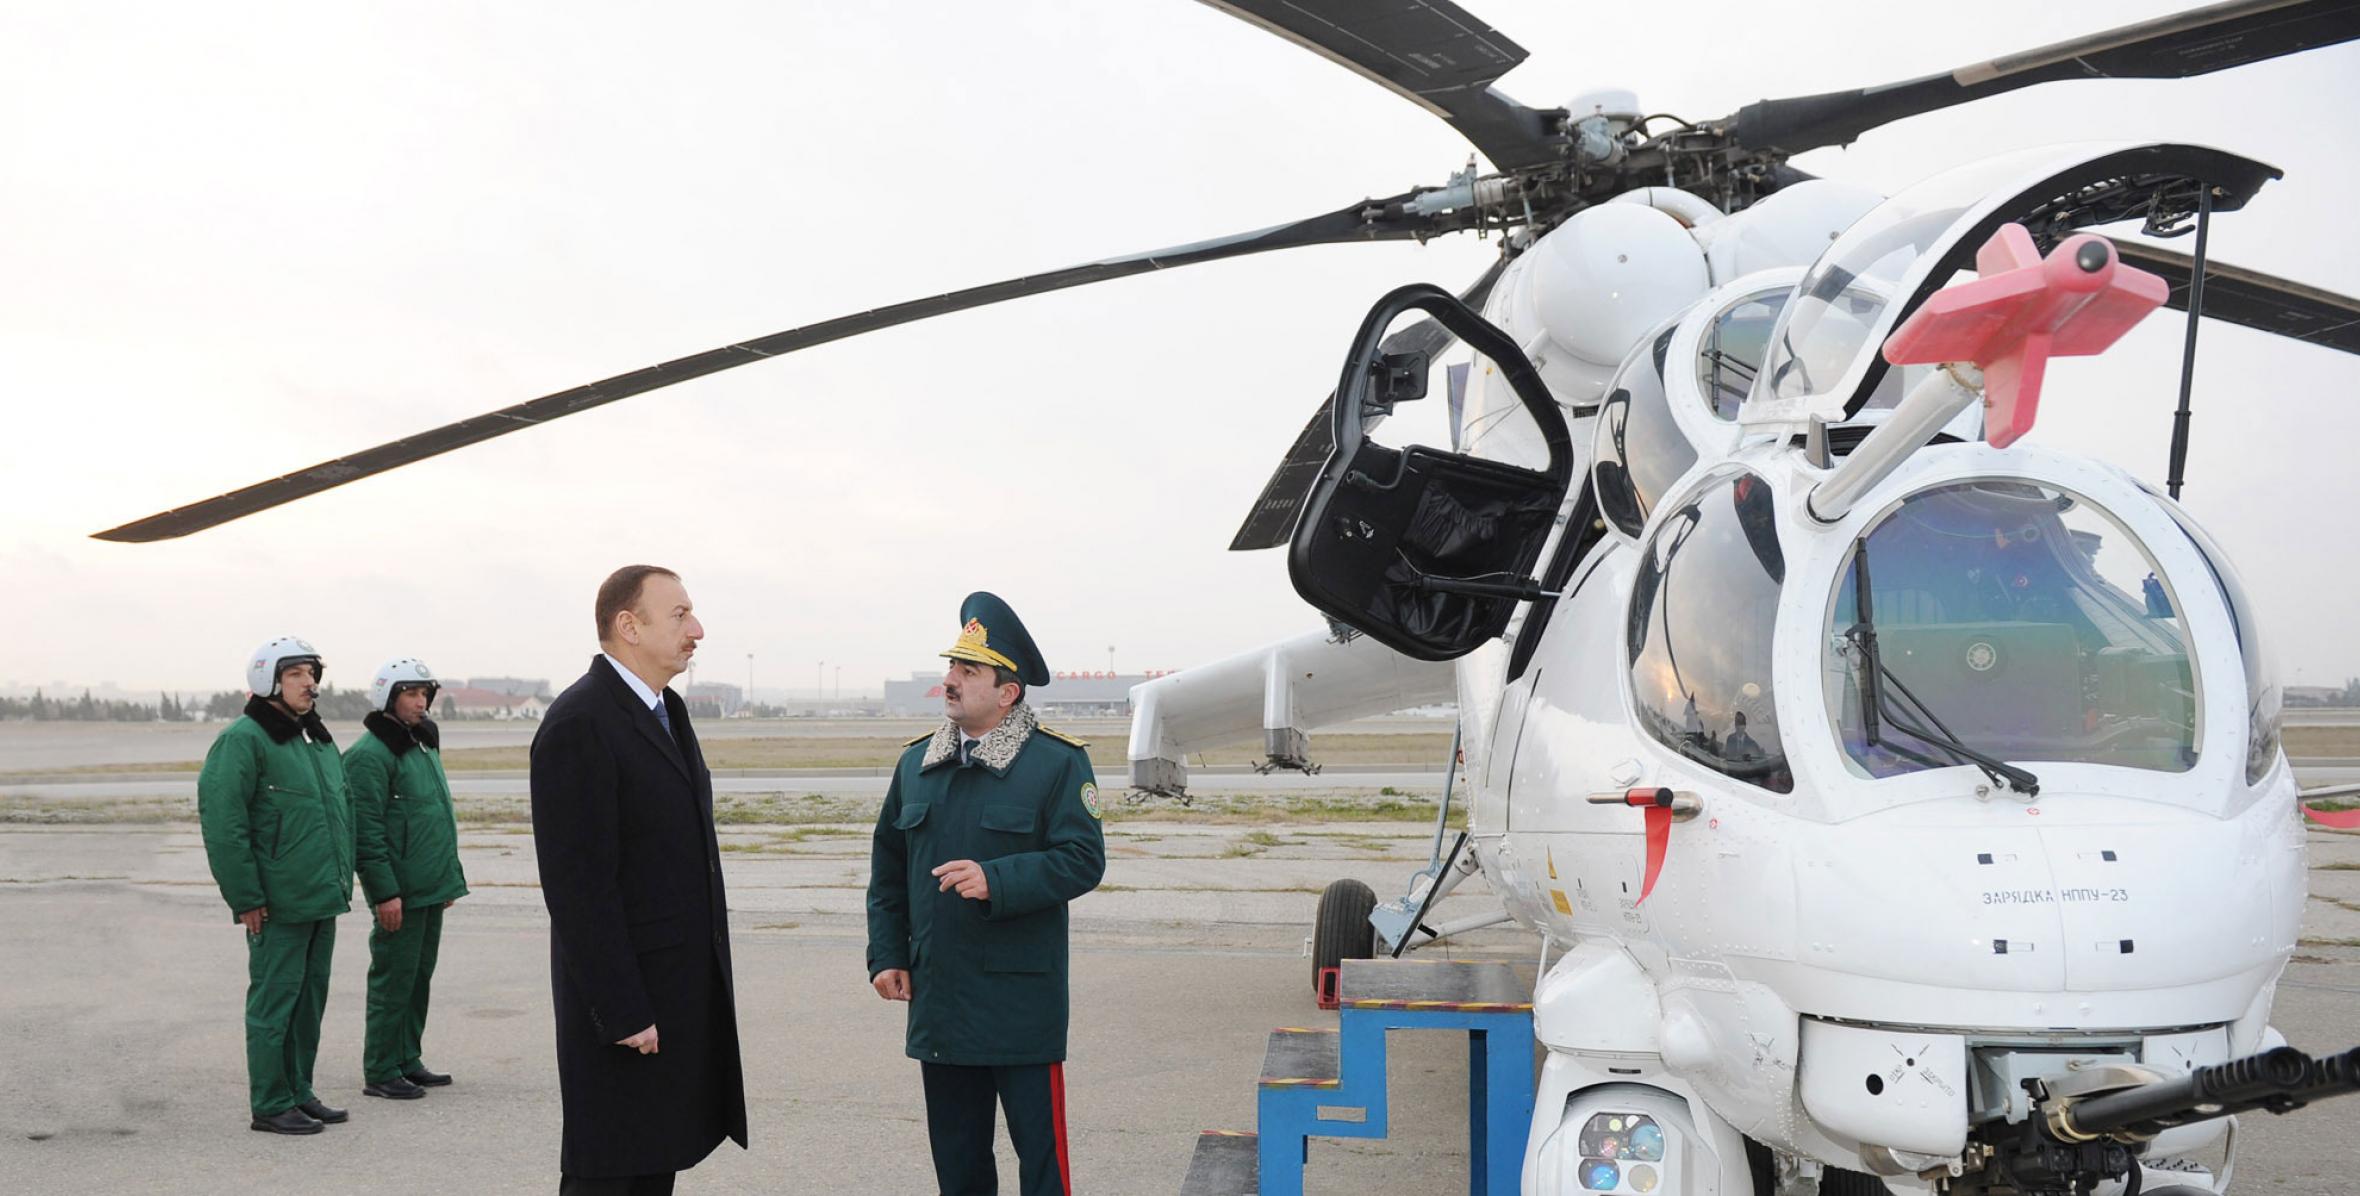 Ilham Aliyev reviewed the military helicopters brought to Azerbaijan